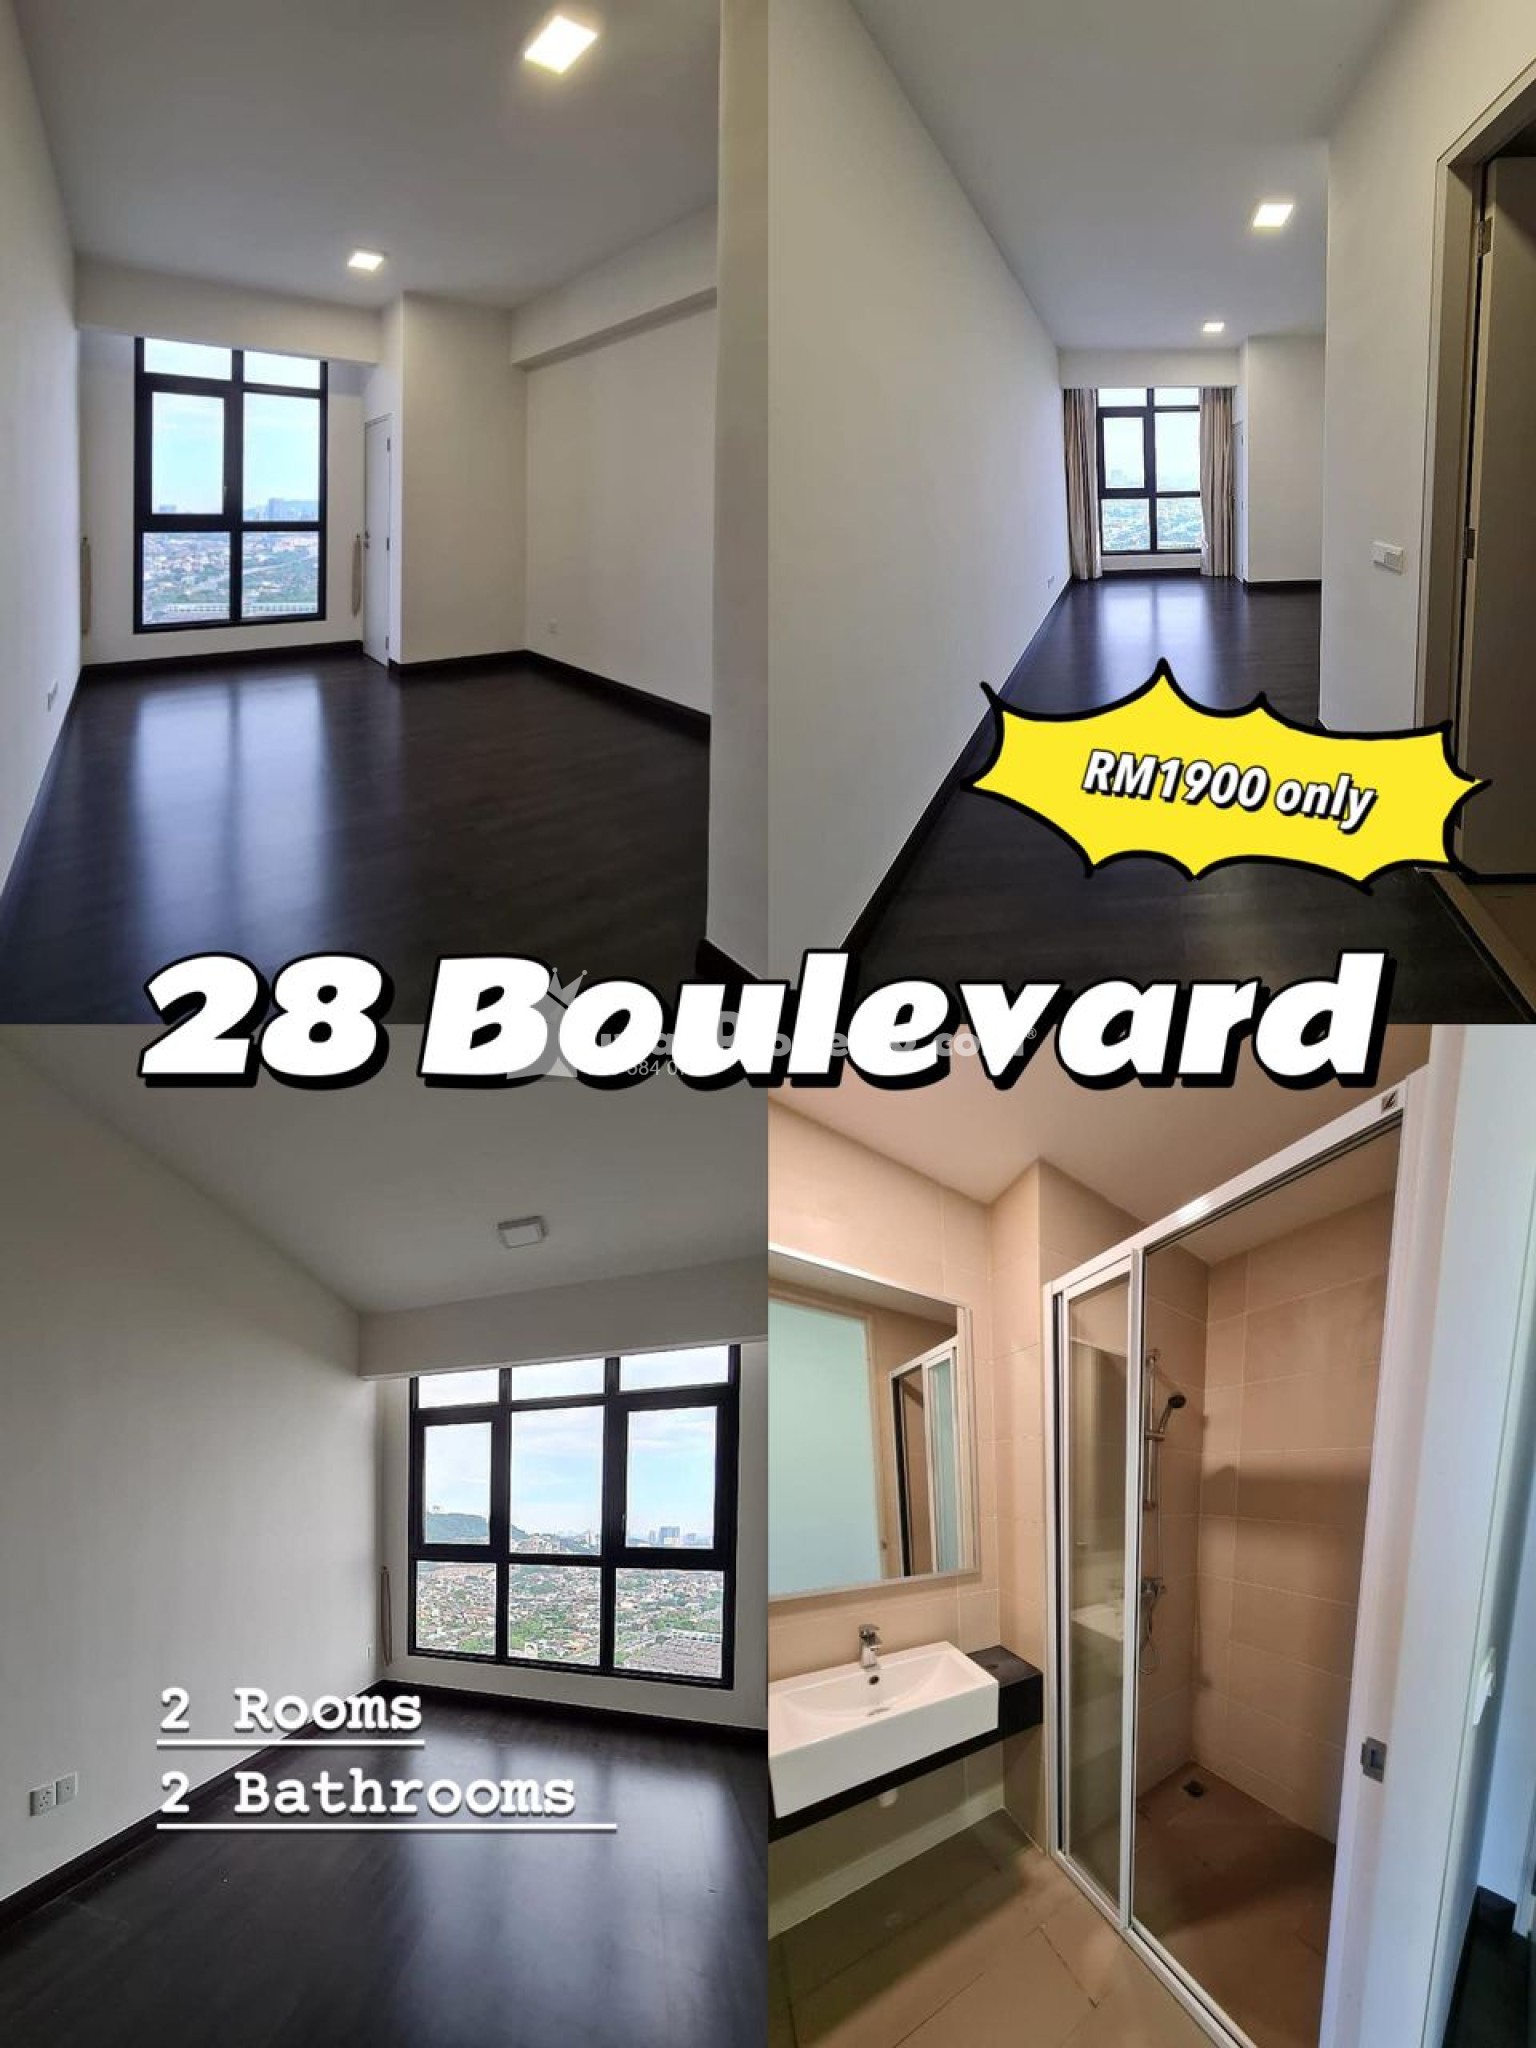 Condo For Rent at 28 Boulevard